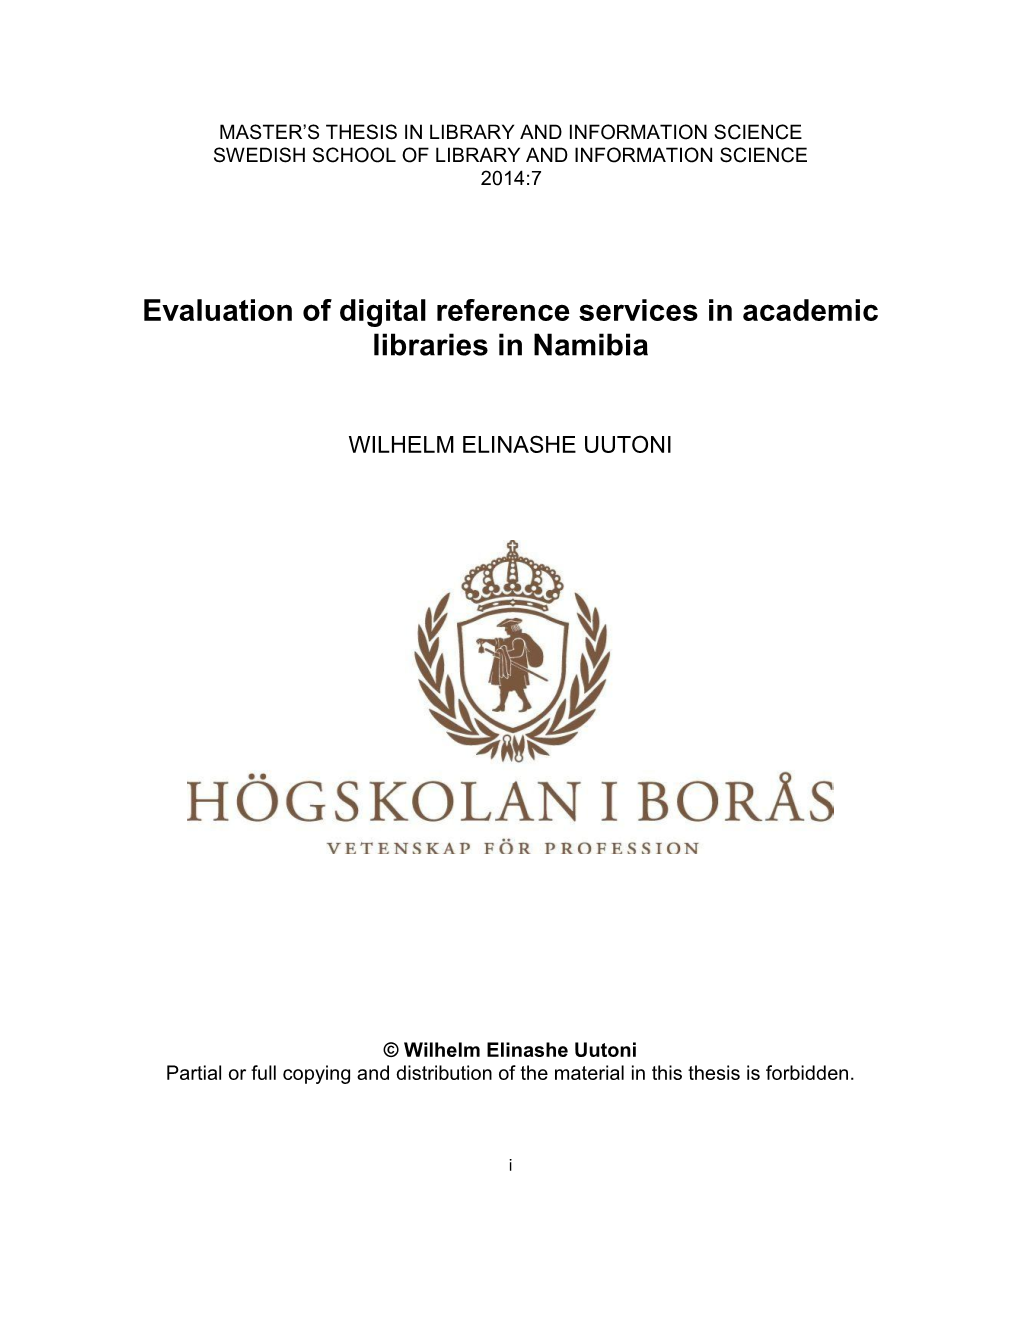 Evaluation of Digital Reference Services in Academic Libraries in Namibia